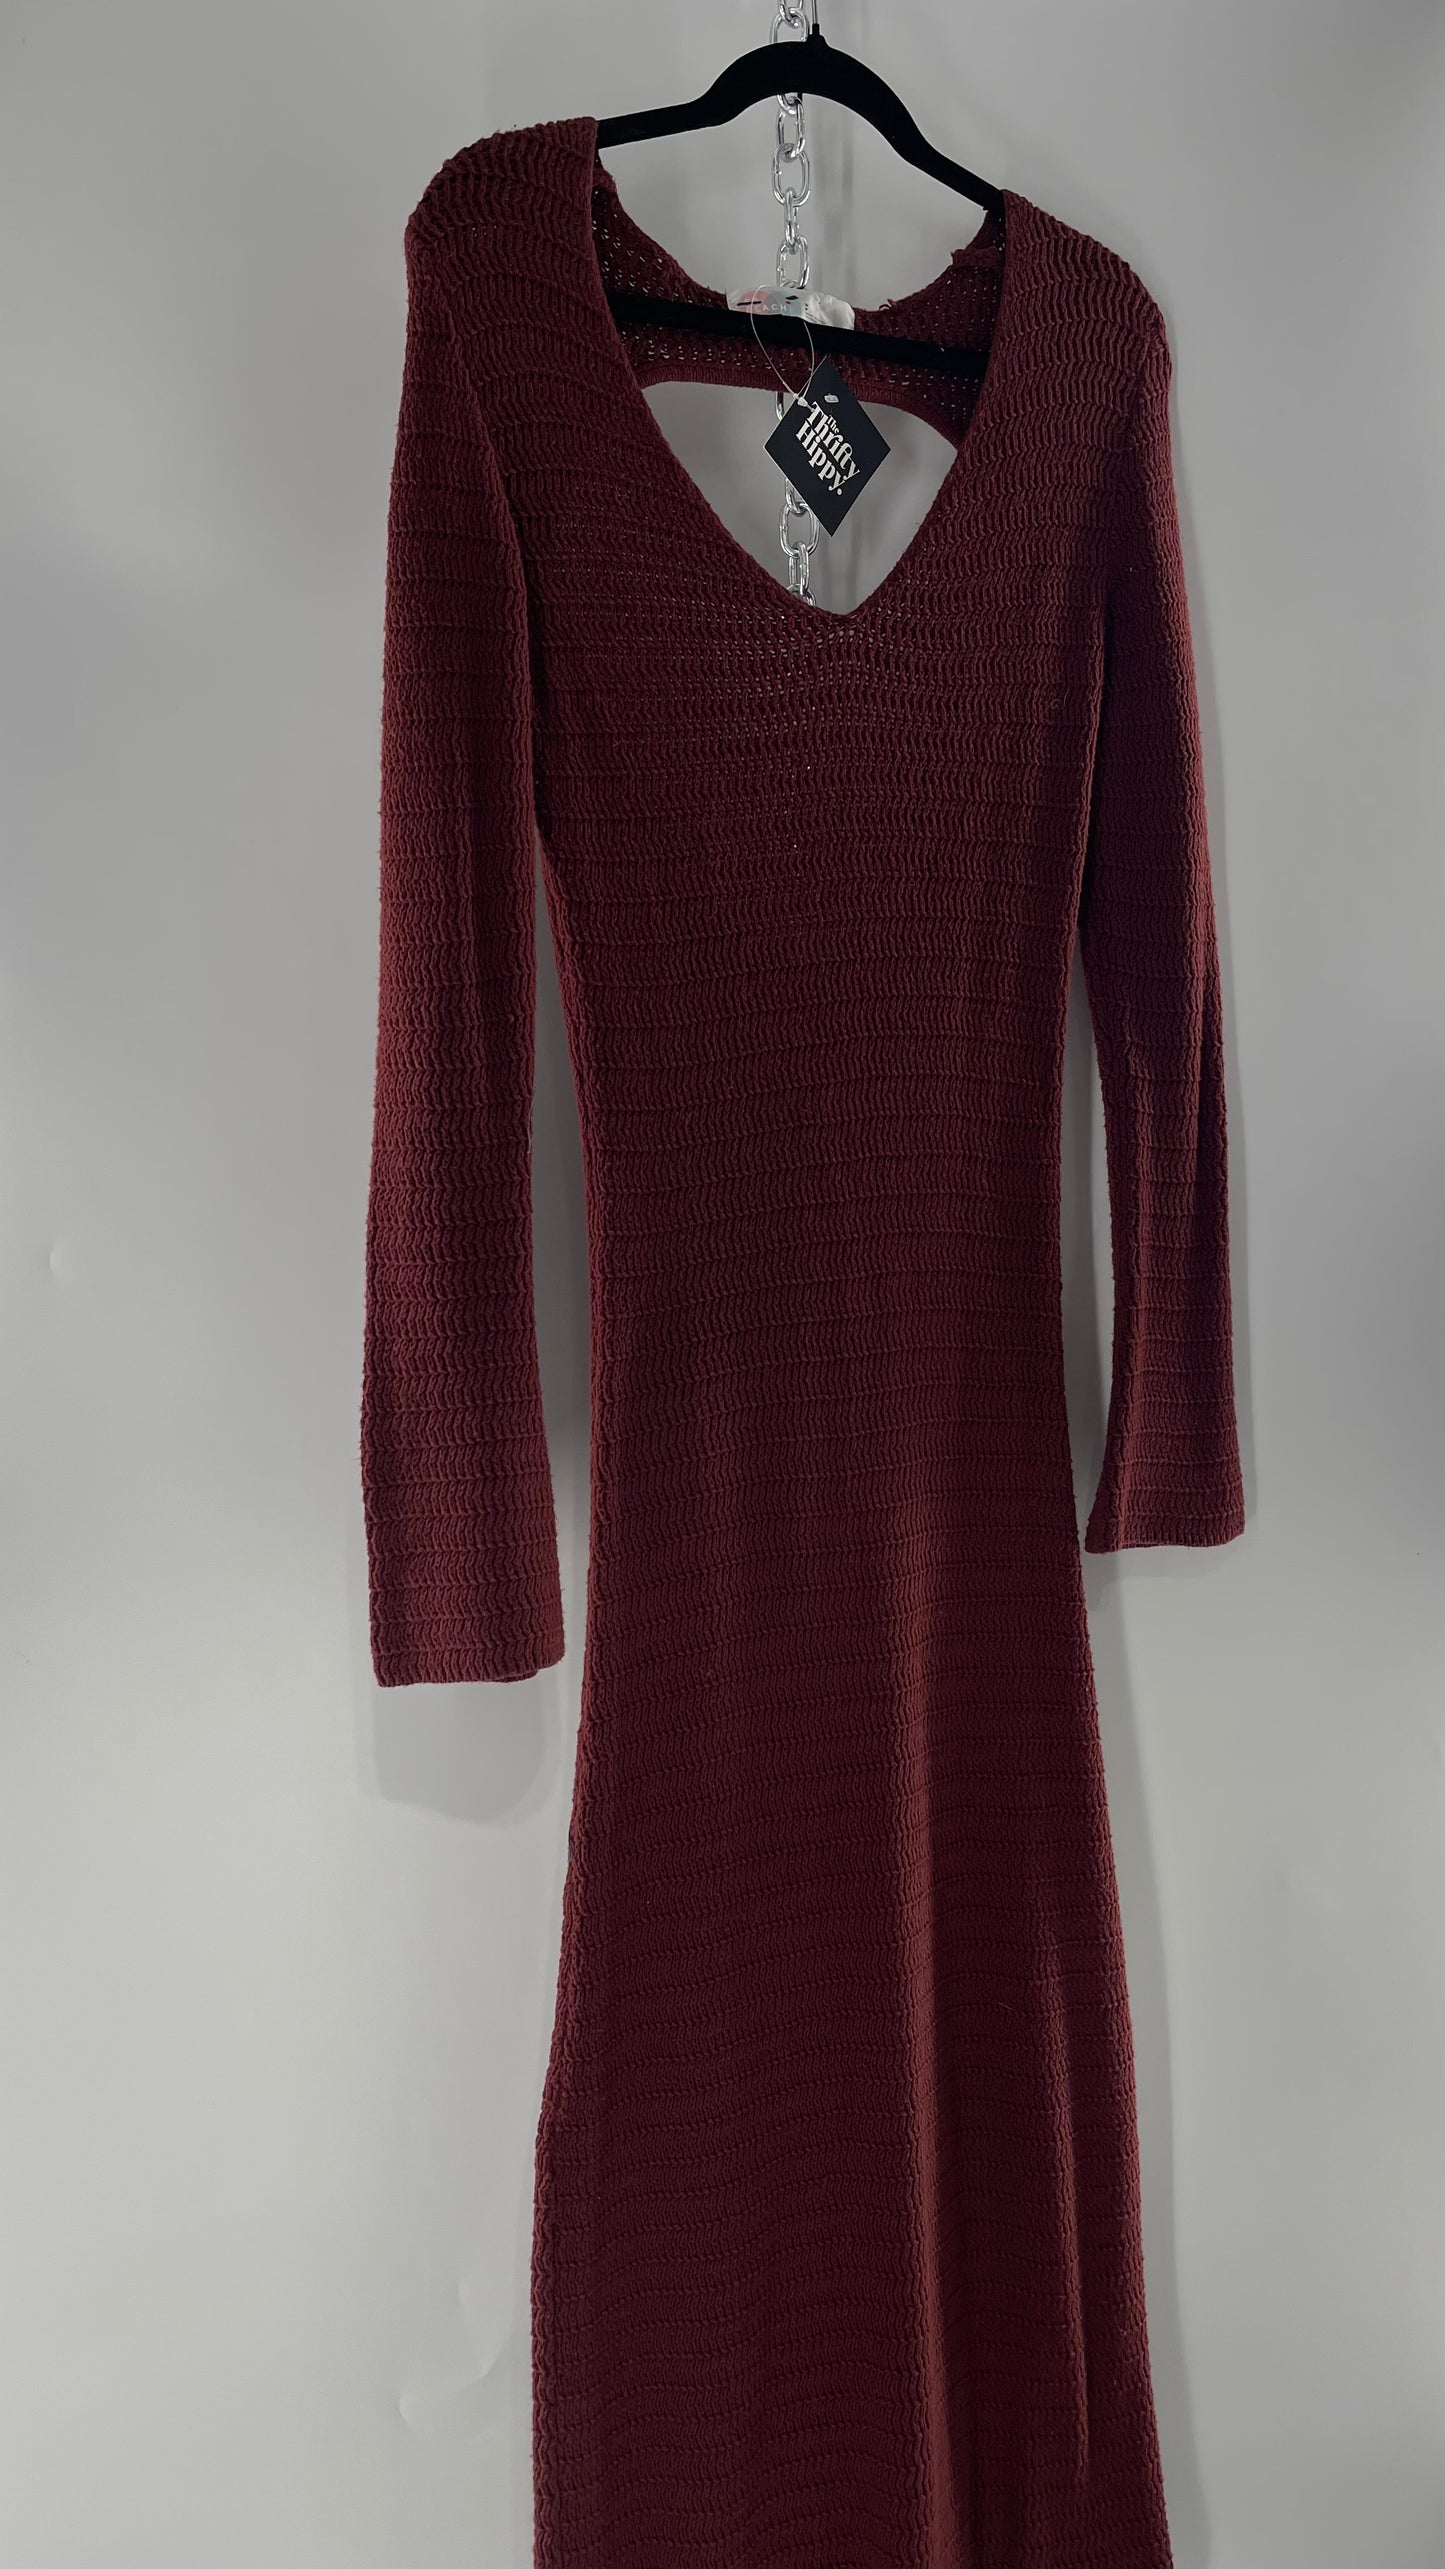 Free People Burgundy Knit Maxi Dress with Open Back and Bell Sleeves (Small)